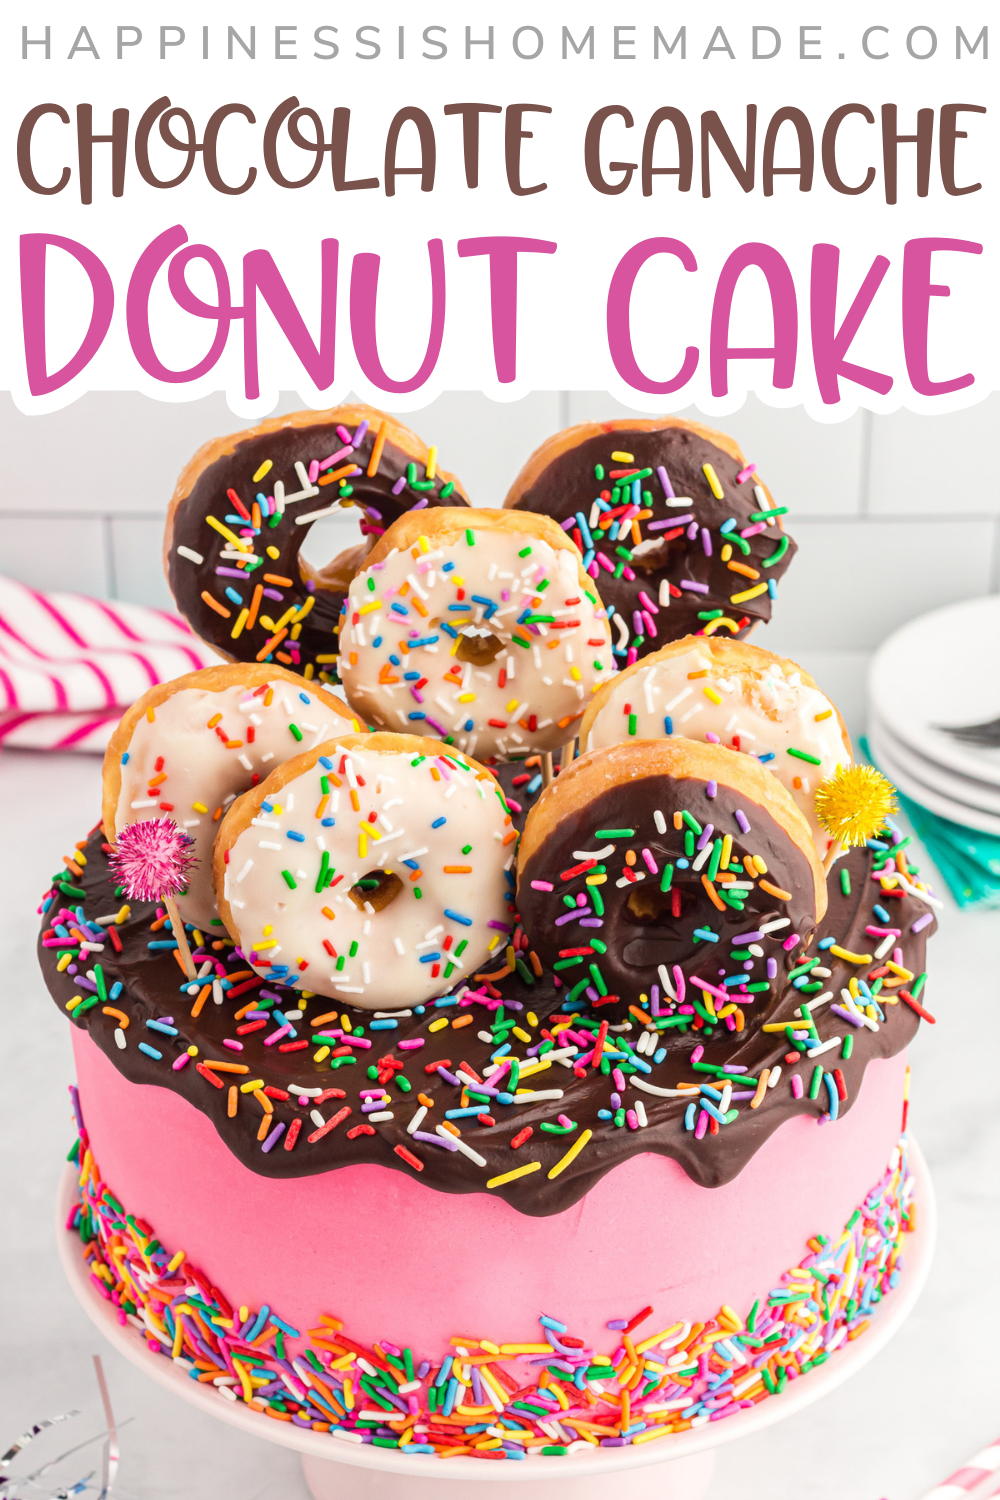 Chocolate Ganache Frosted Donut Cake